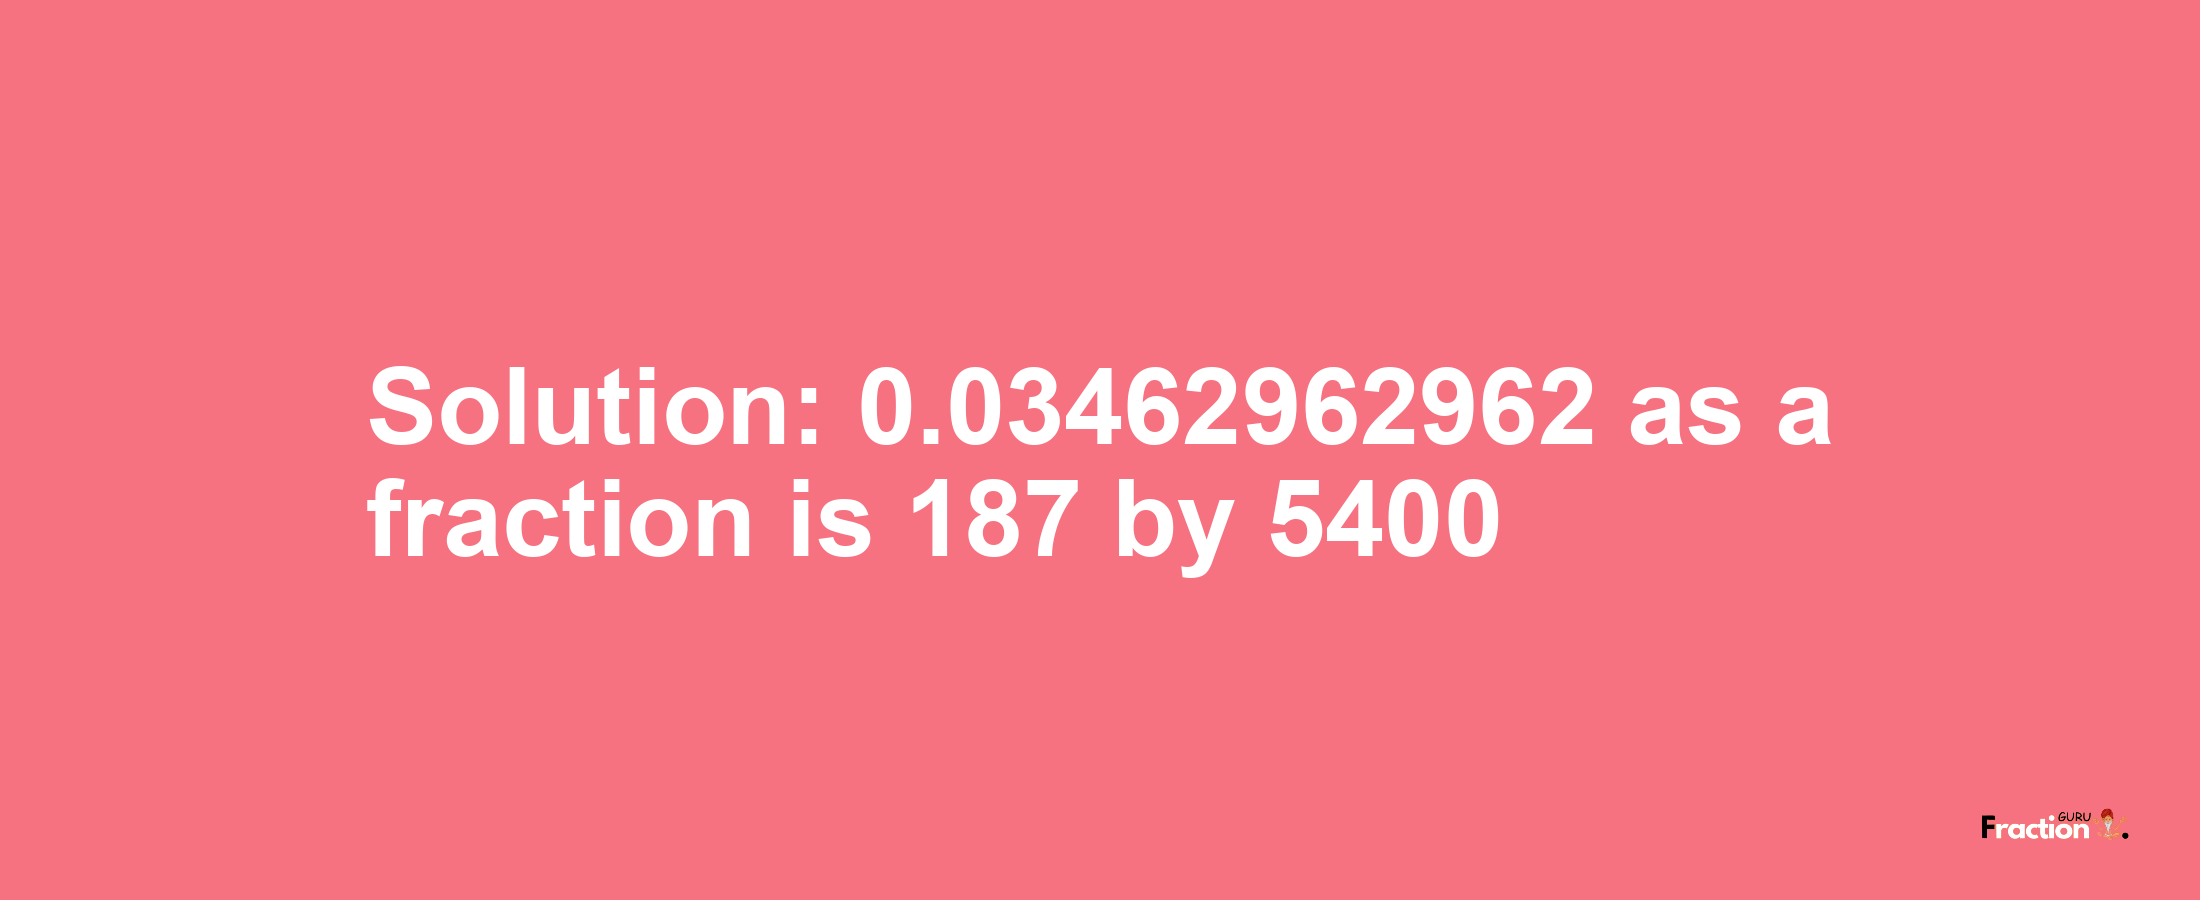 Solution:0.03462962962 as a fraction is 187/5400